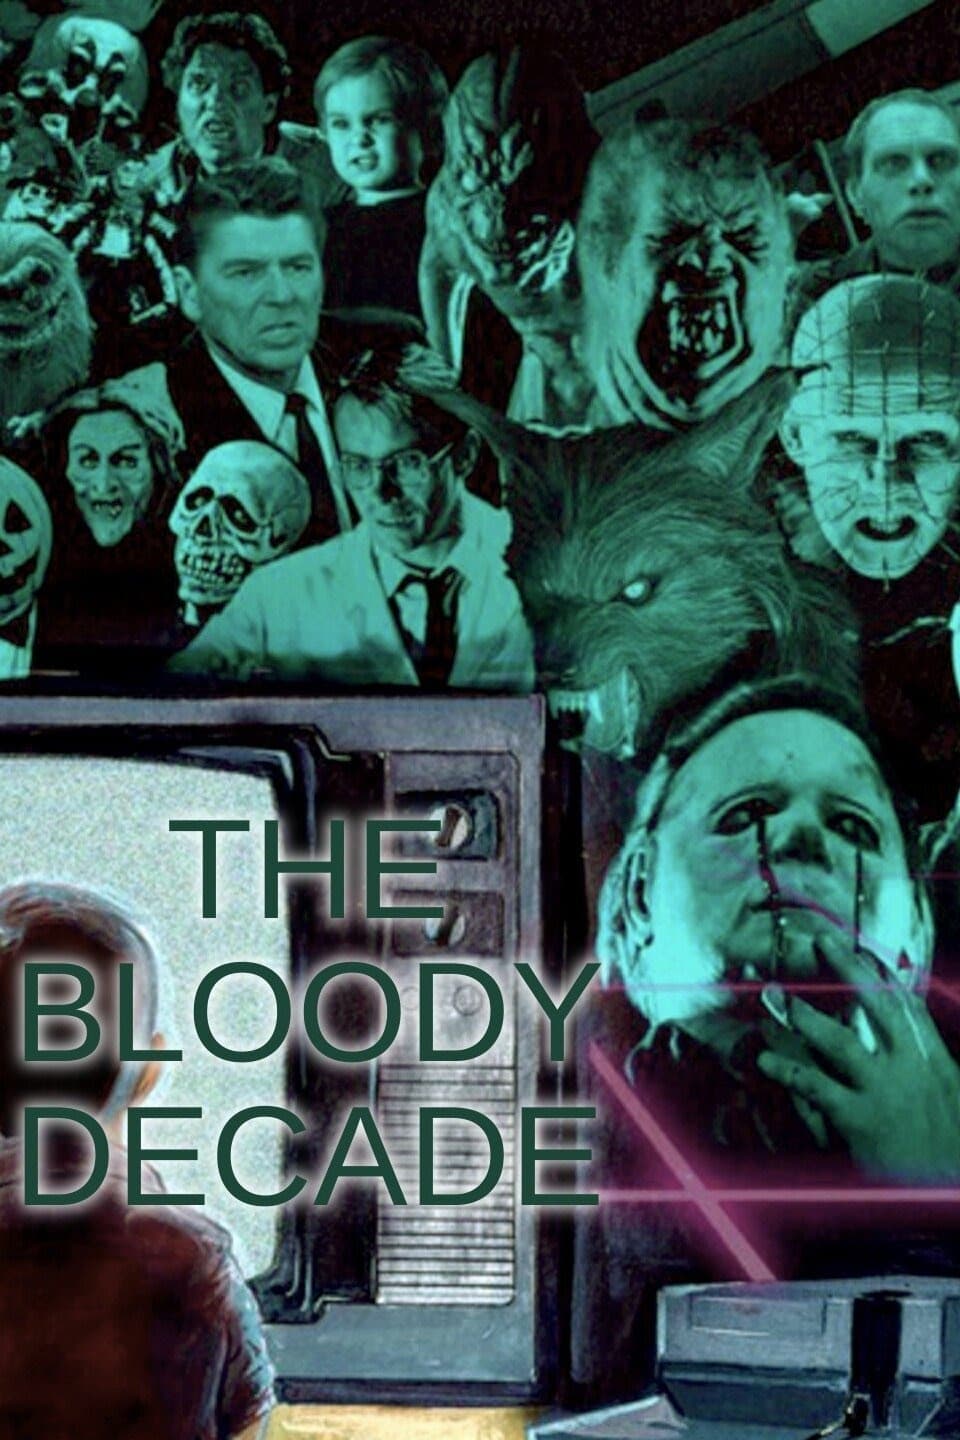 The Bloody Decade